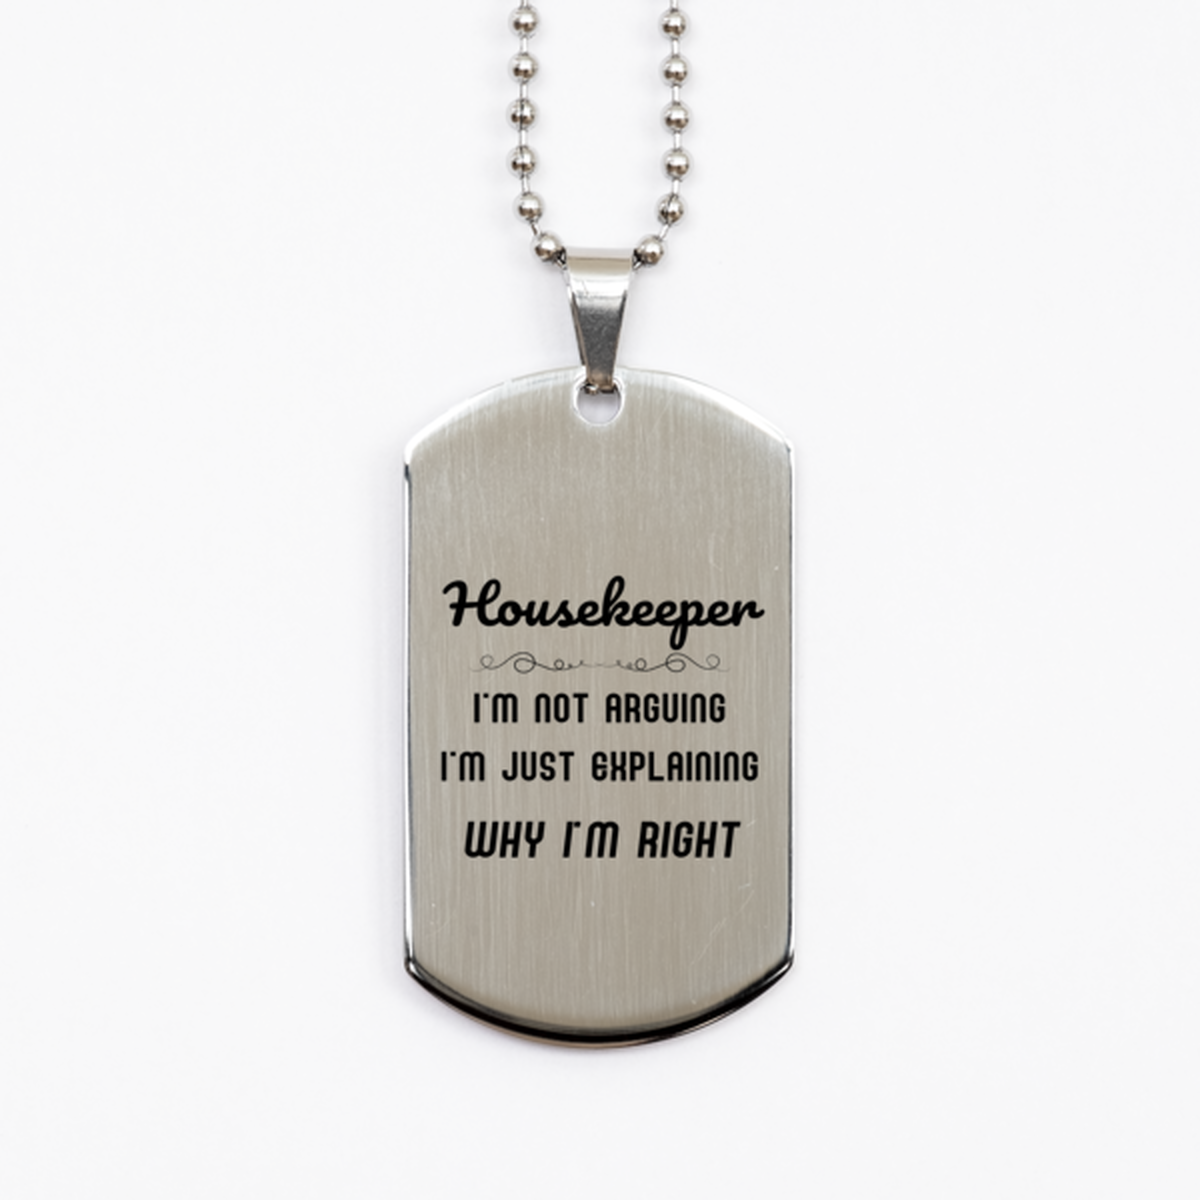 Housekeeper I'm not Arguing. I'm Just Explaining Why I'm RIGHT Silver Dog Tag, Funny Saying Quote Housekeeper Gifts For Housekeeper Graduation Birthday Christmas Gifts for Men Women Coworker